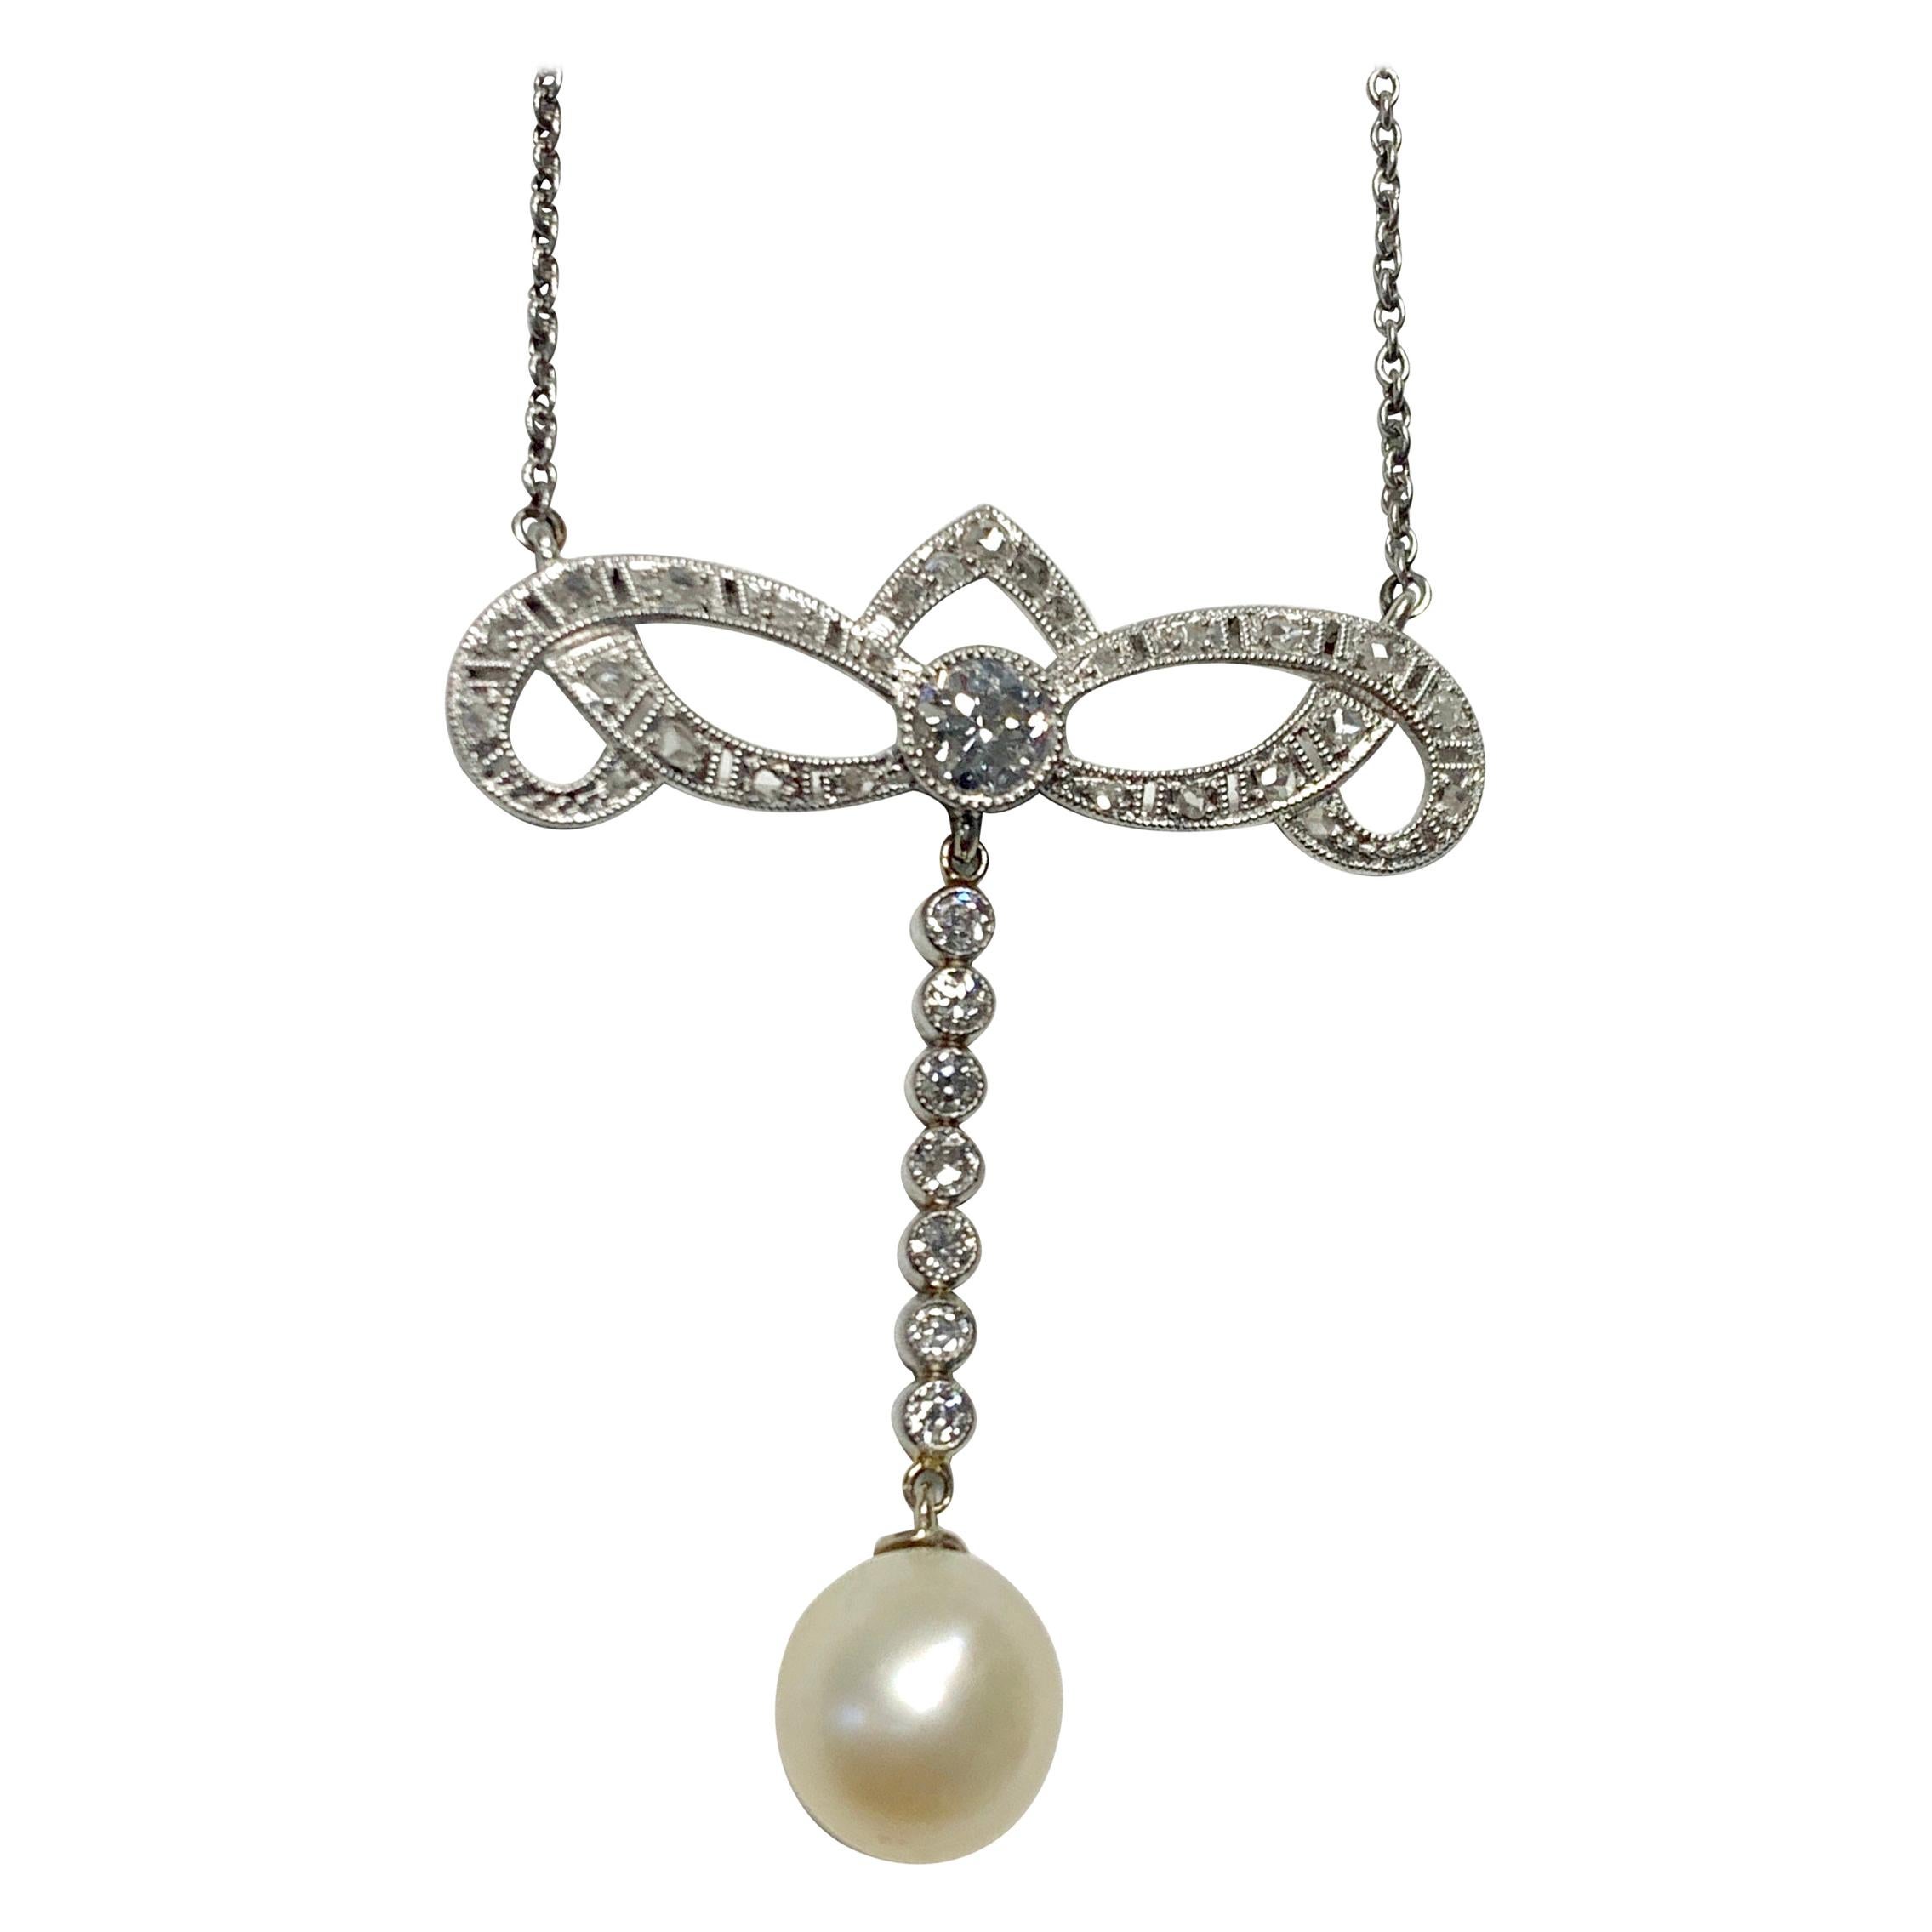 Antique Diamond and Pearl Necklace in Platinum and 18k White Gold